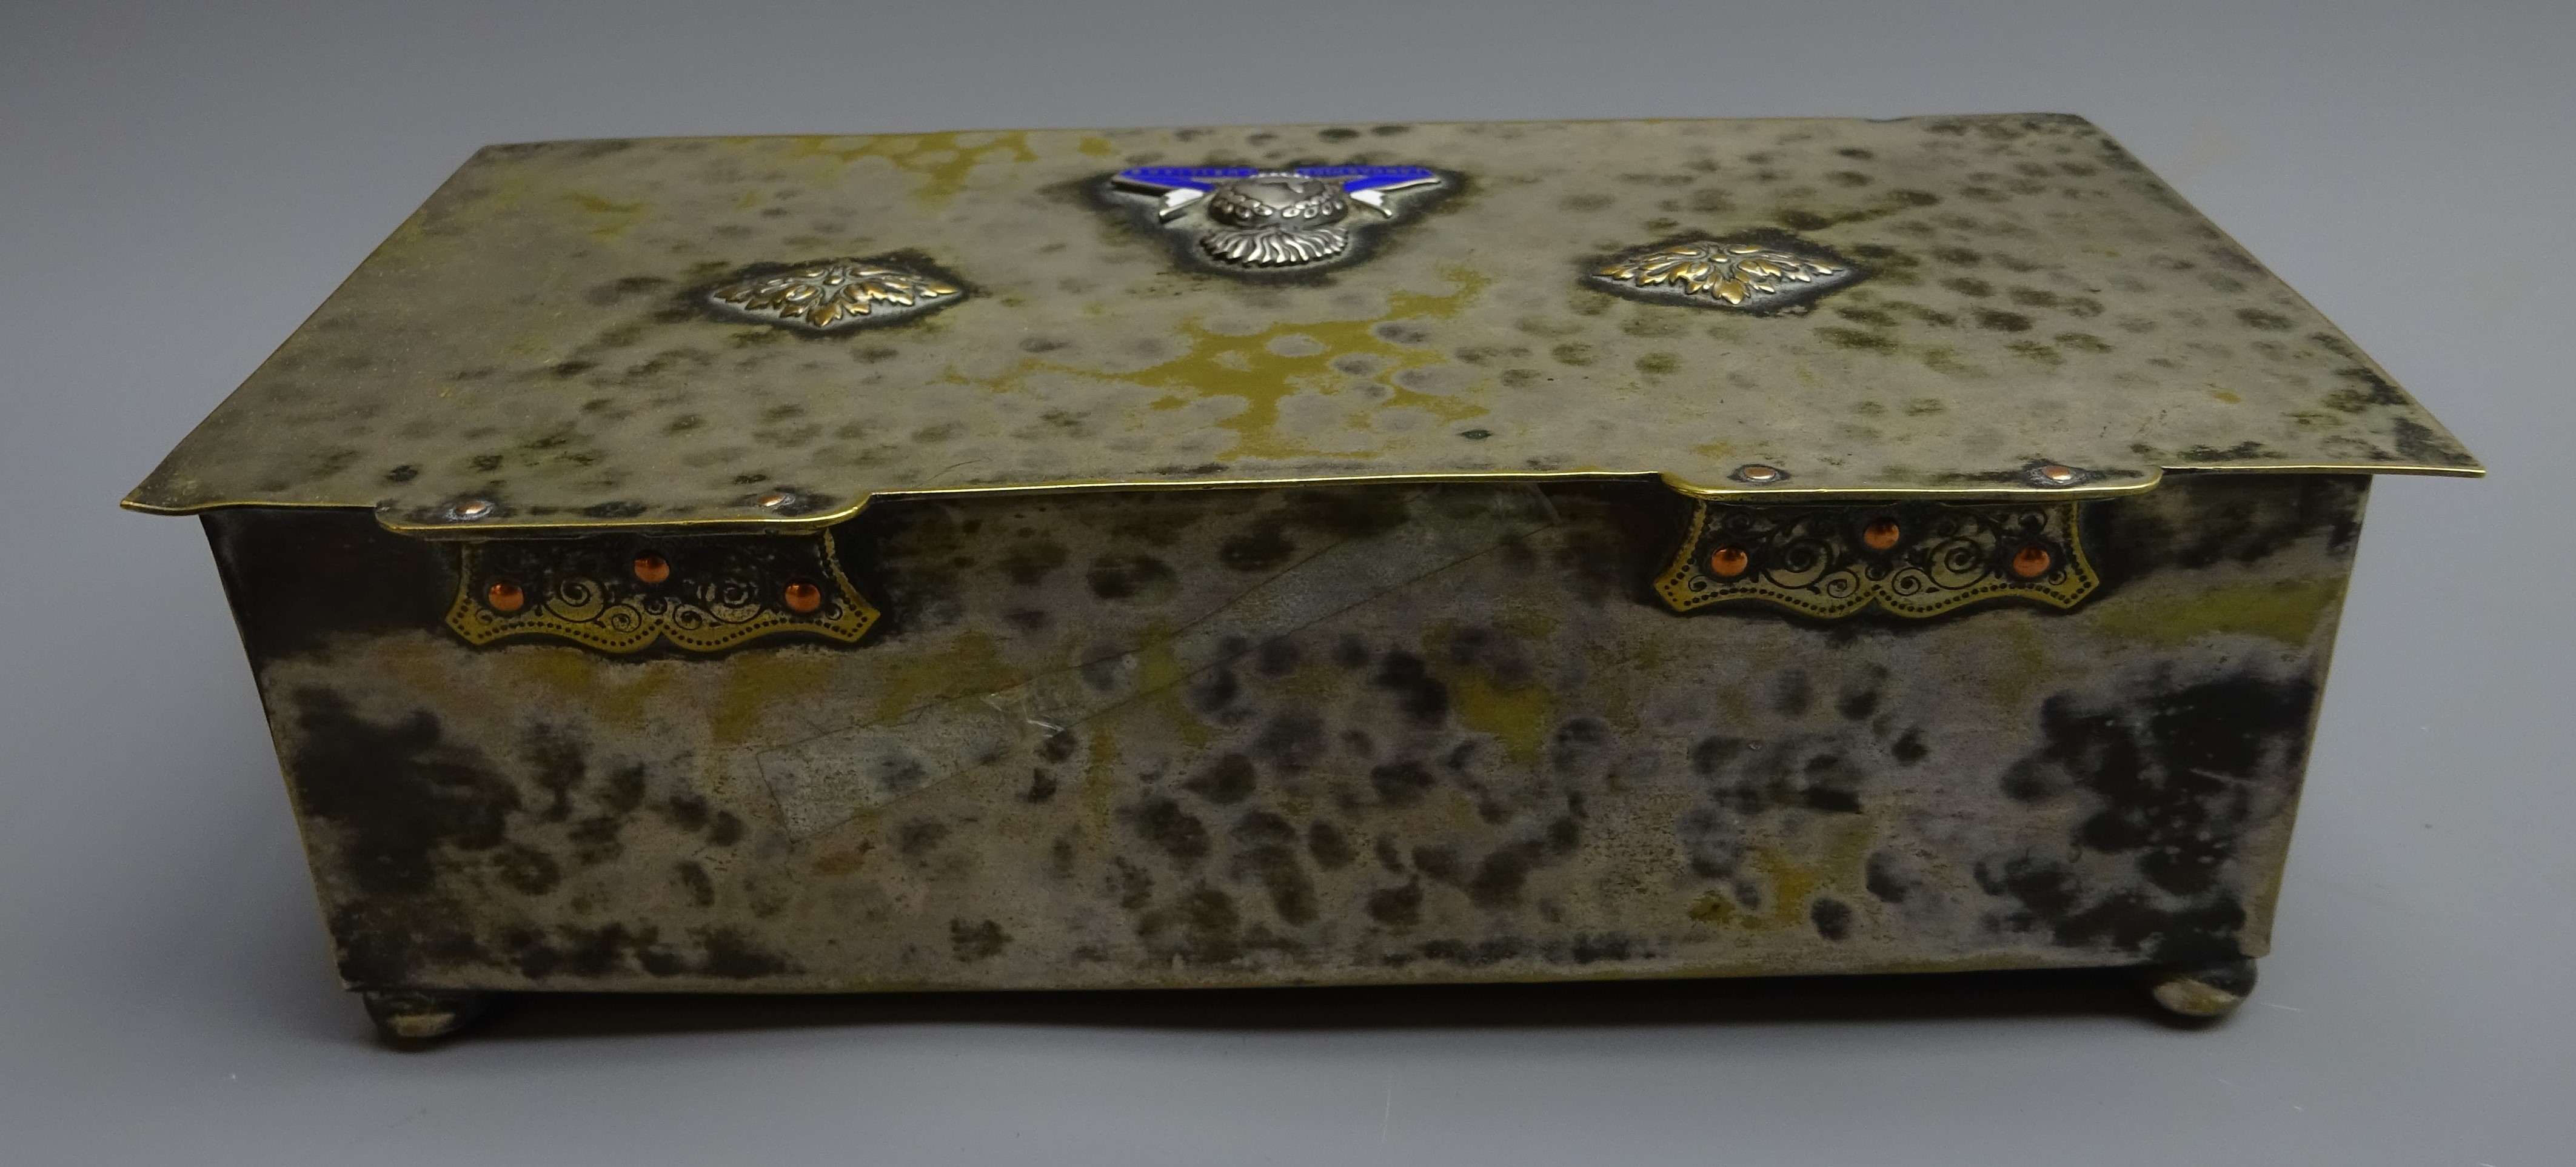 Lancashire Fusiliers table cigarette box, hammered silvered body with wood lined interior, - Image 5 of 7